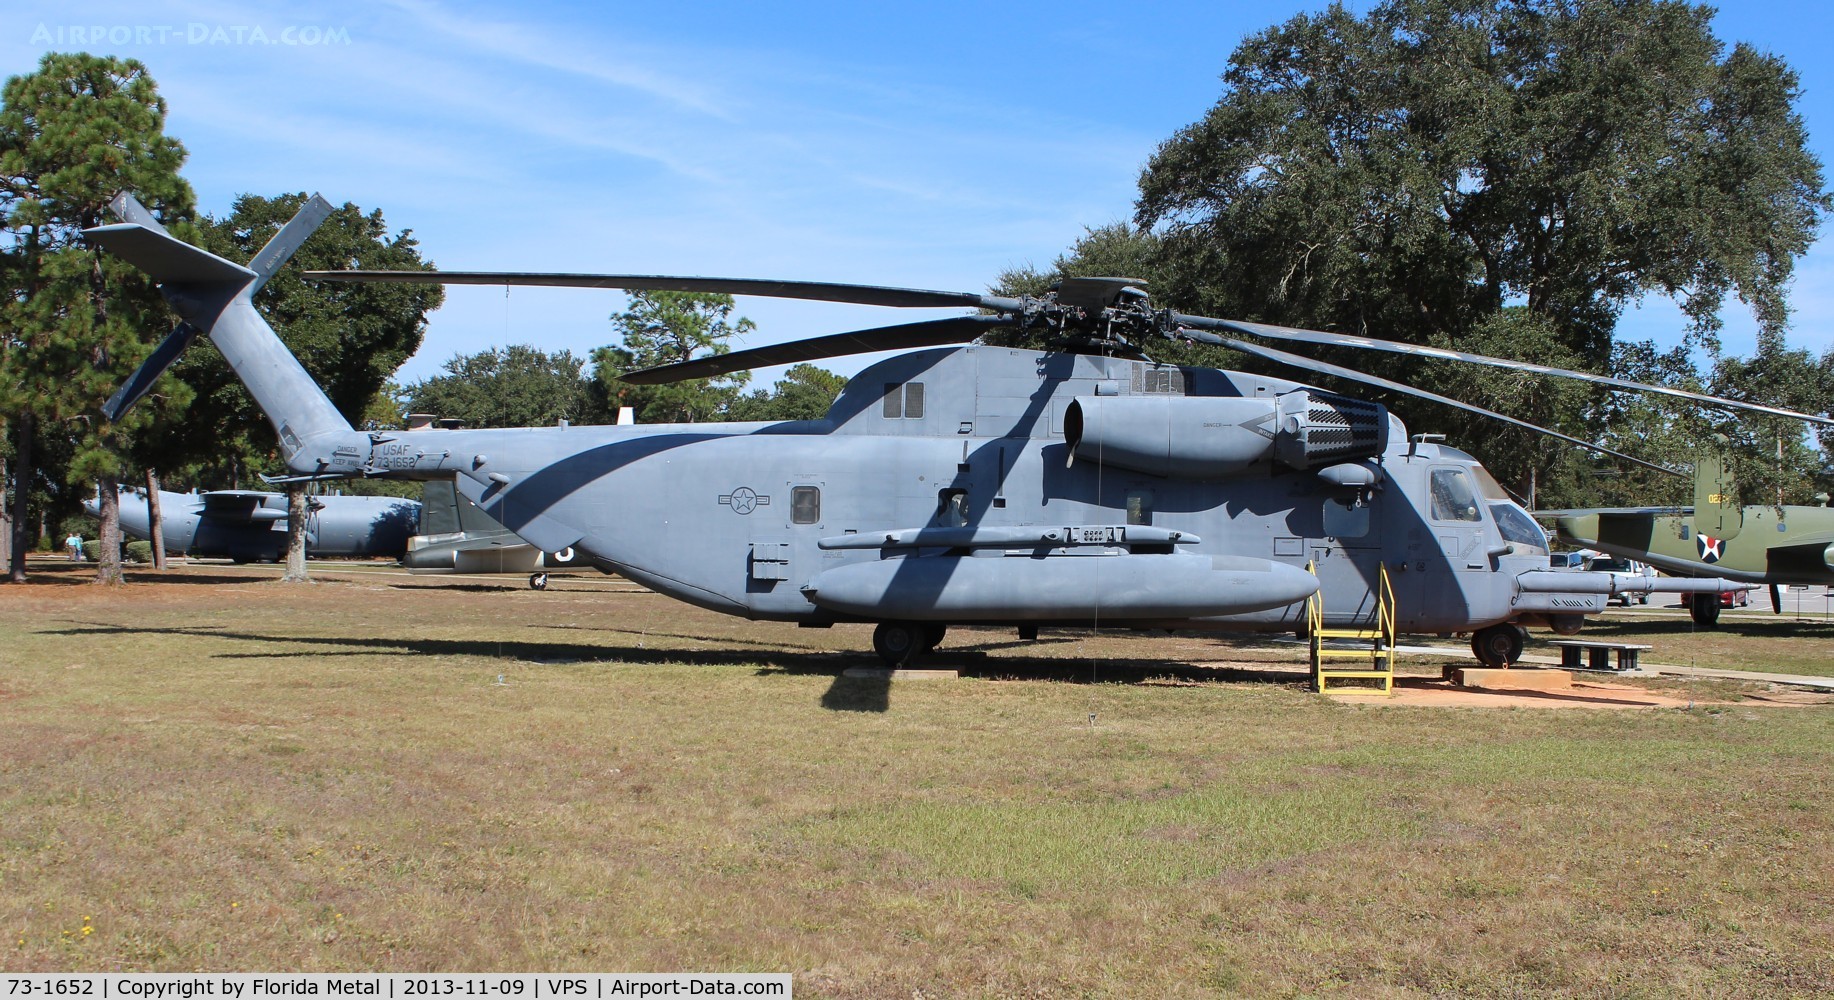 73-1652, 1973 Sikorsky MH-53M Pave Low IV C/N 65-390, MH-53 Pave Low IV at USAF Armament Museum